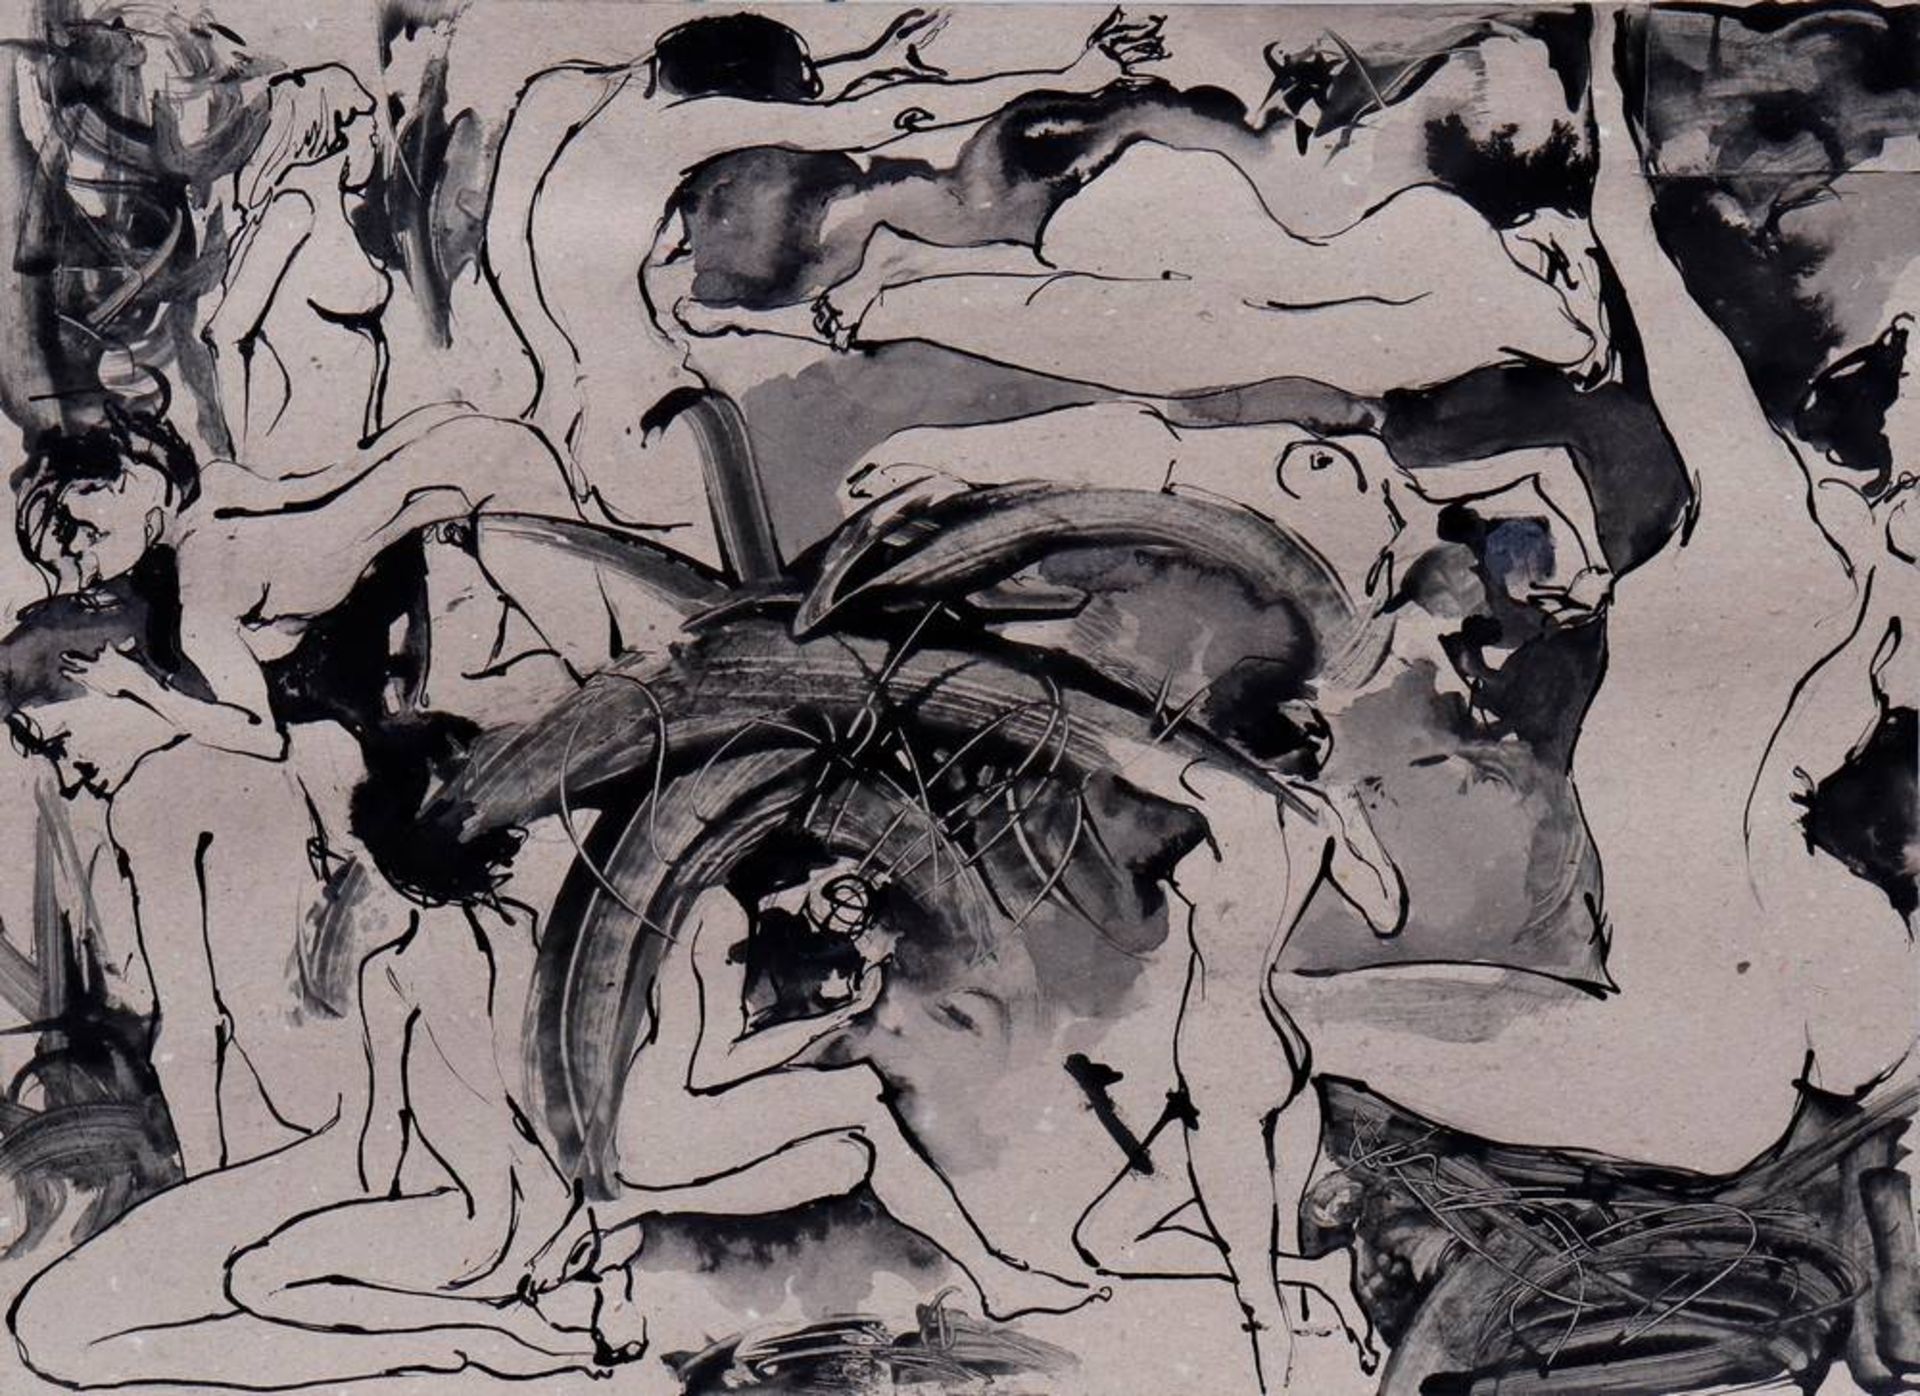 J. Theefemale nudes, verso titled "8. Rebound", ink drawing, verso signed "JThee" lower right, sheet